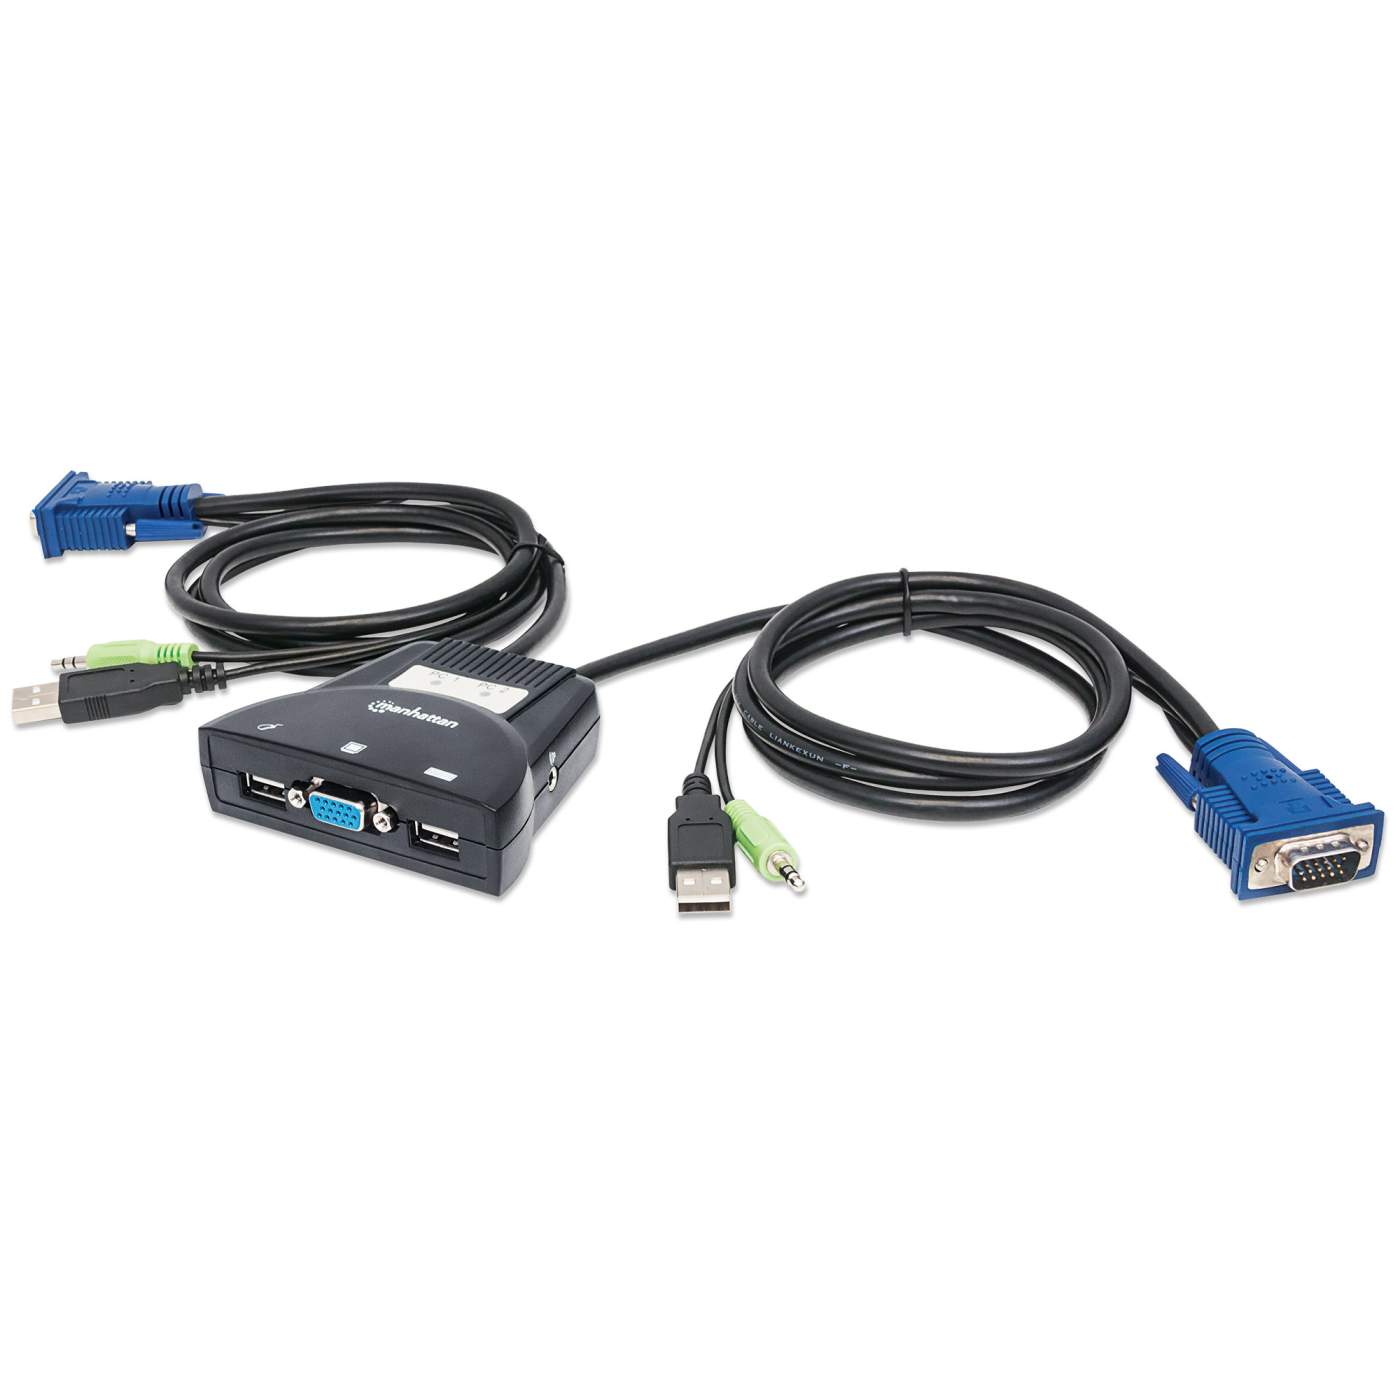 2 Port Triple Monitor KVM USB C, 3 Monitor KVM Switch USB-C with Audio, USB  2.0 Hub and Cables for 2 Computers/Macs/Mobile Phones Sharing 3 Monitors  and Single Keyboard Mouse 